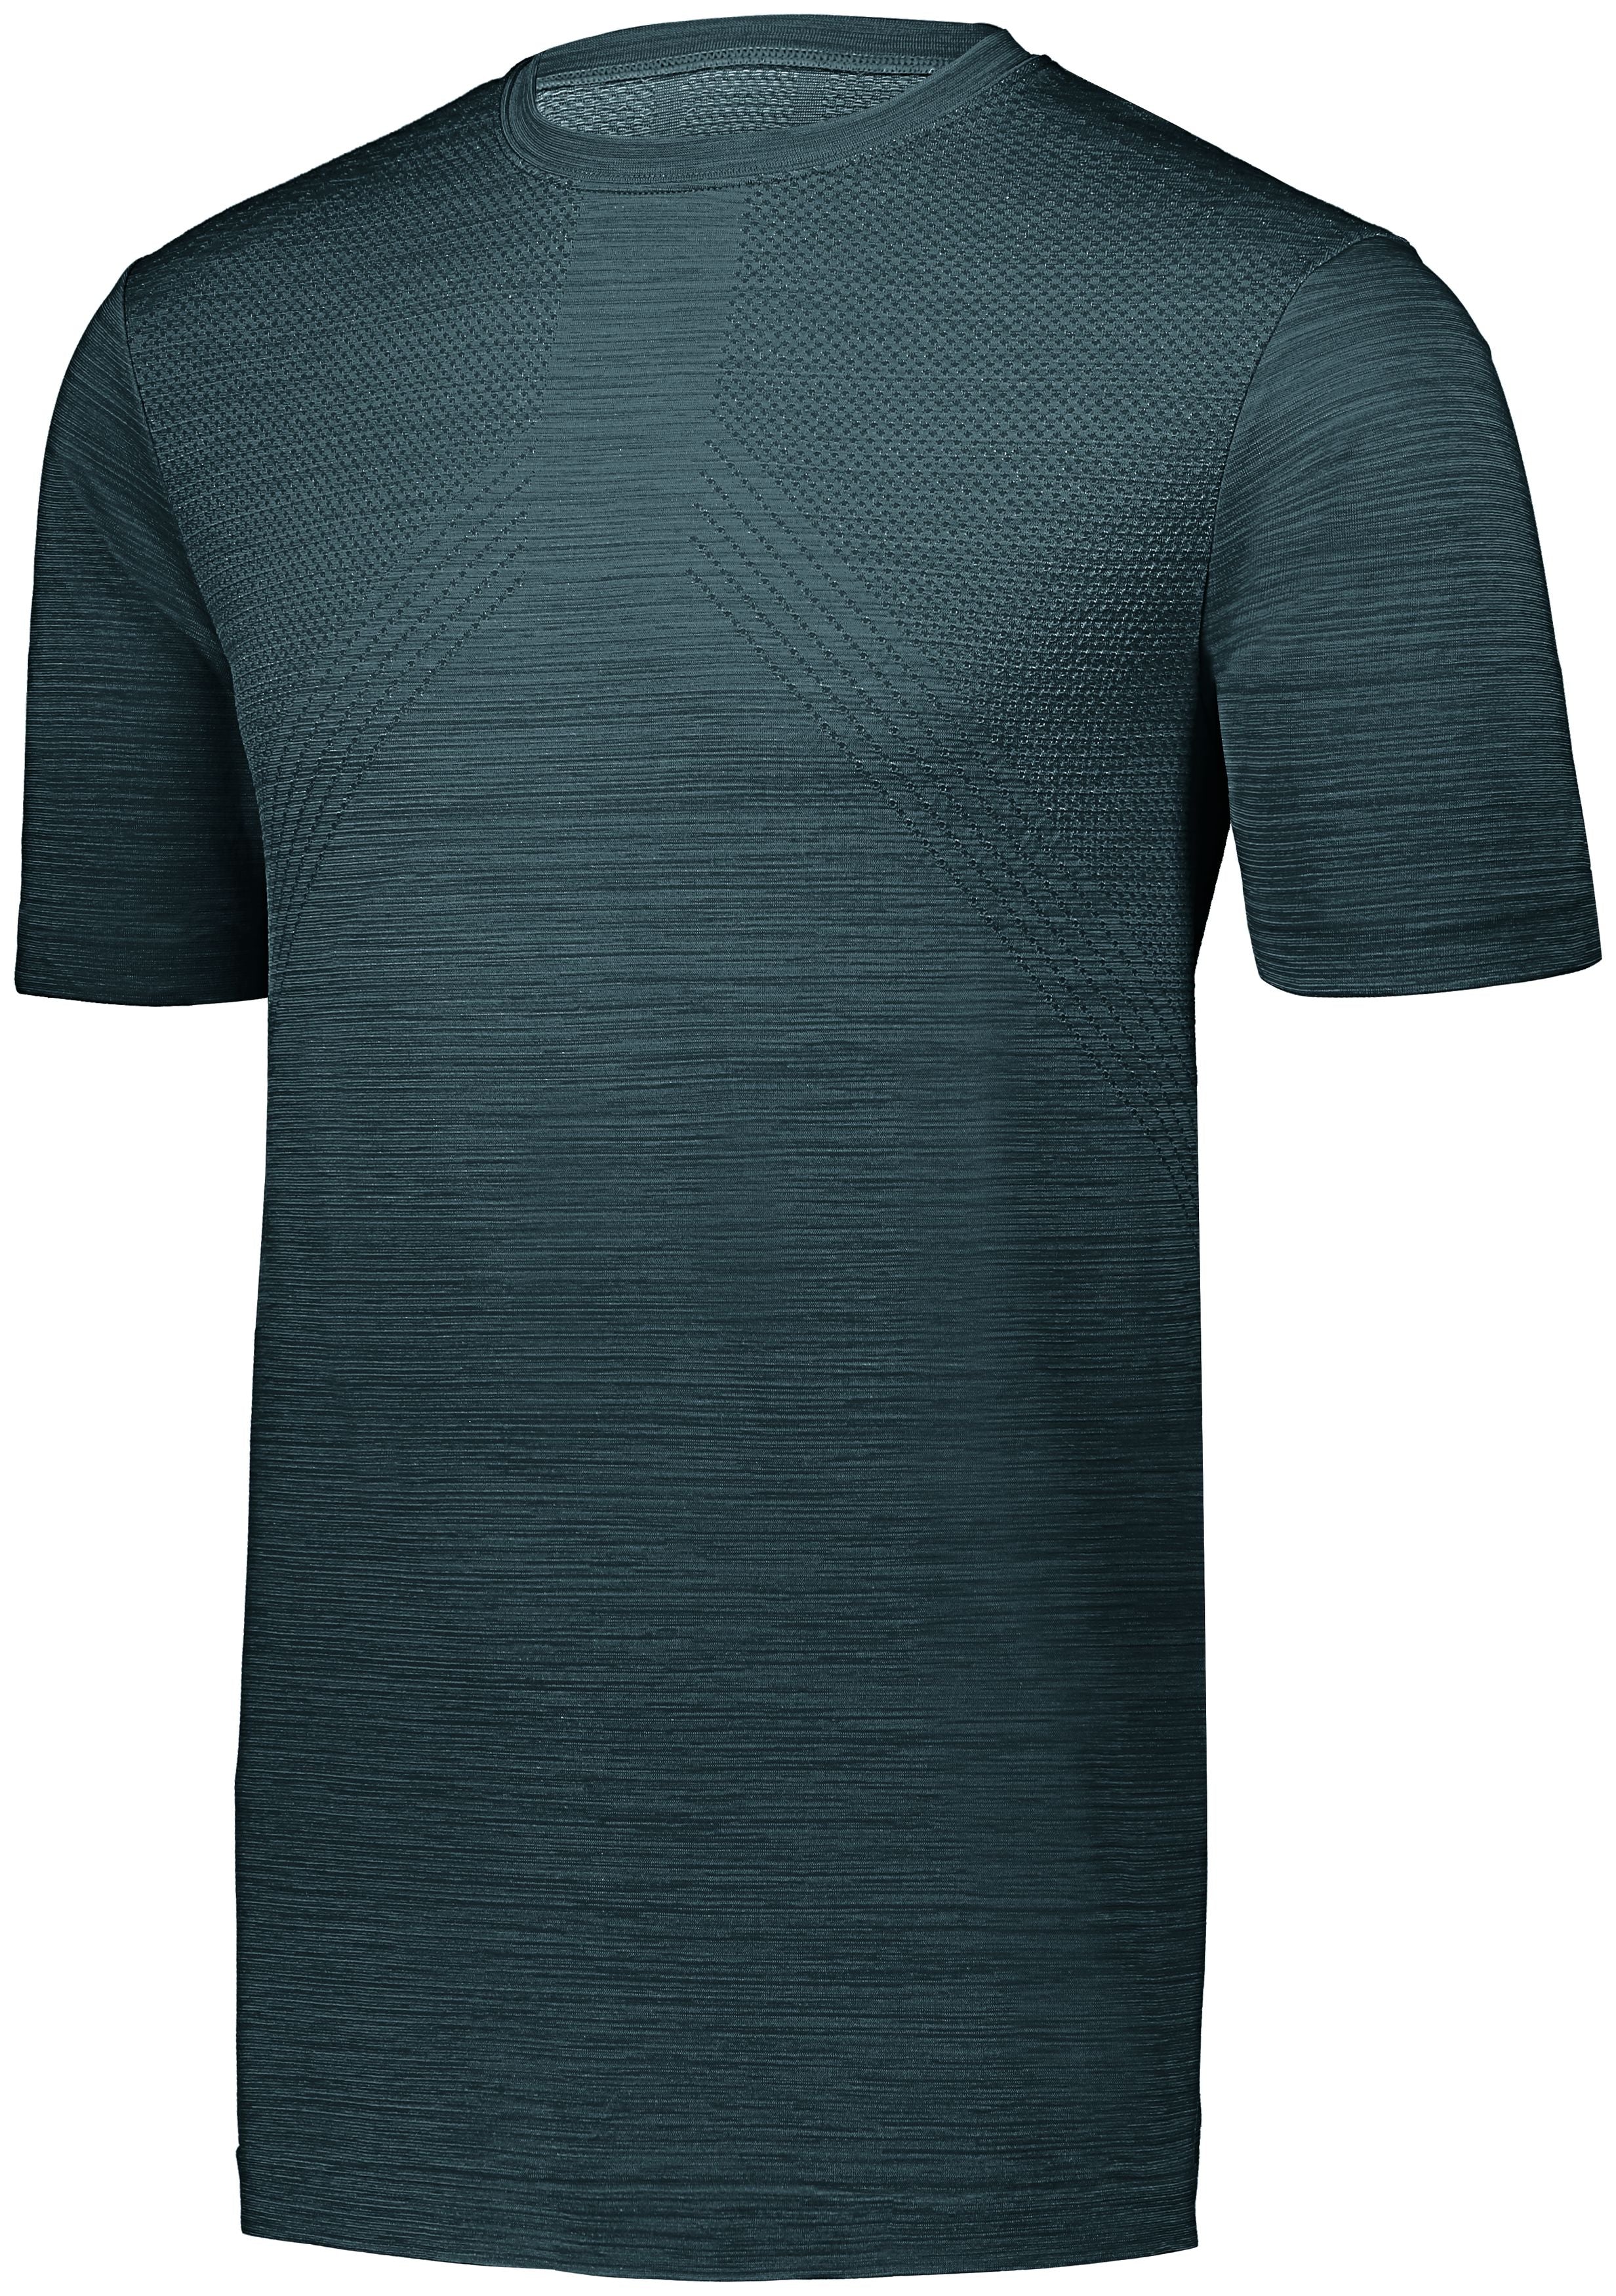 Holloway Striated Shirt Short Sleeve in Graphite  -Part of the Adult, Holloway, Shirts, Striated-Collection product lines at KanaleyCreations.com